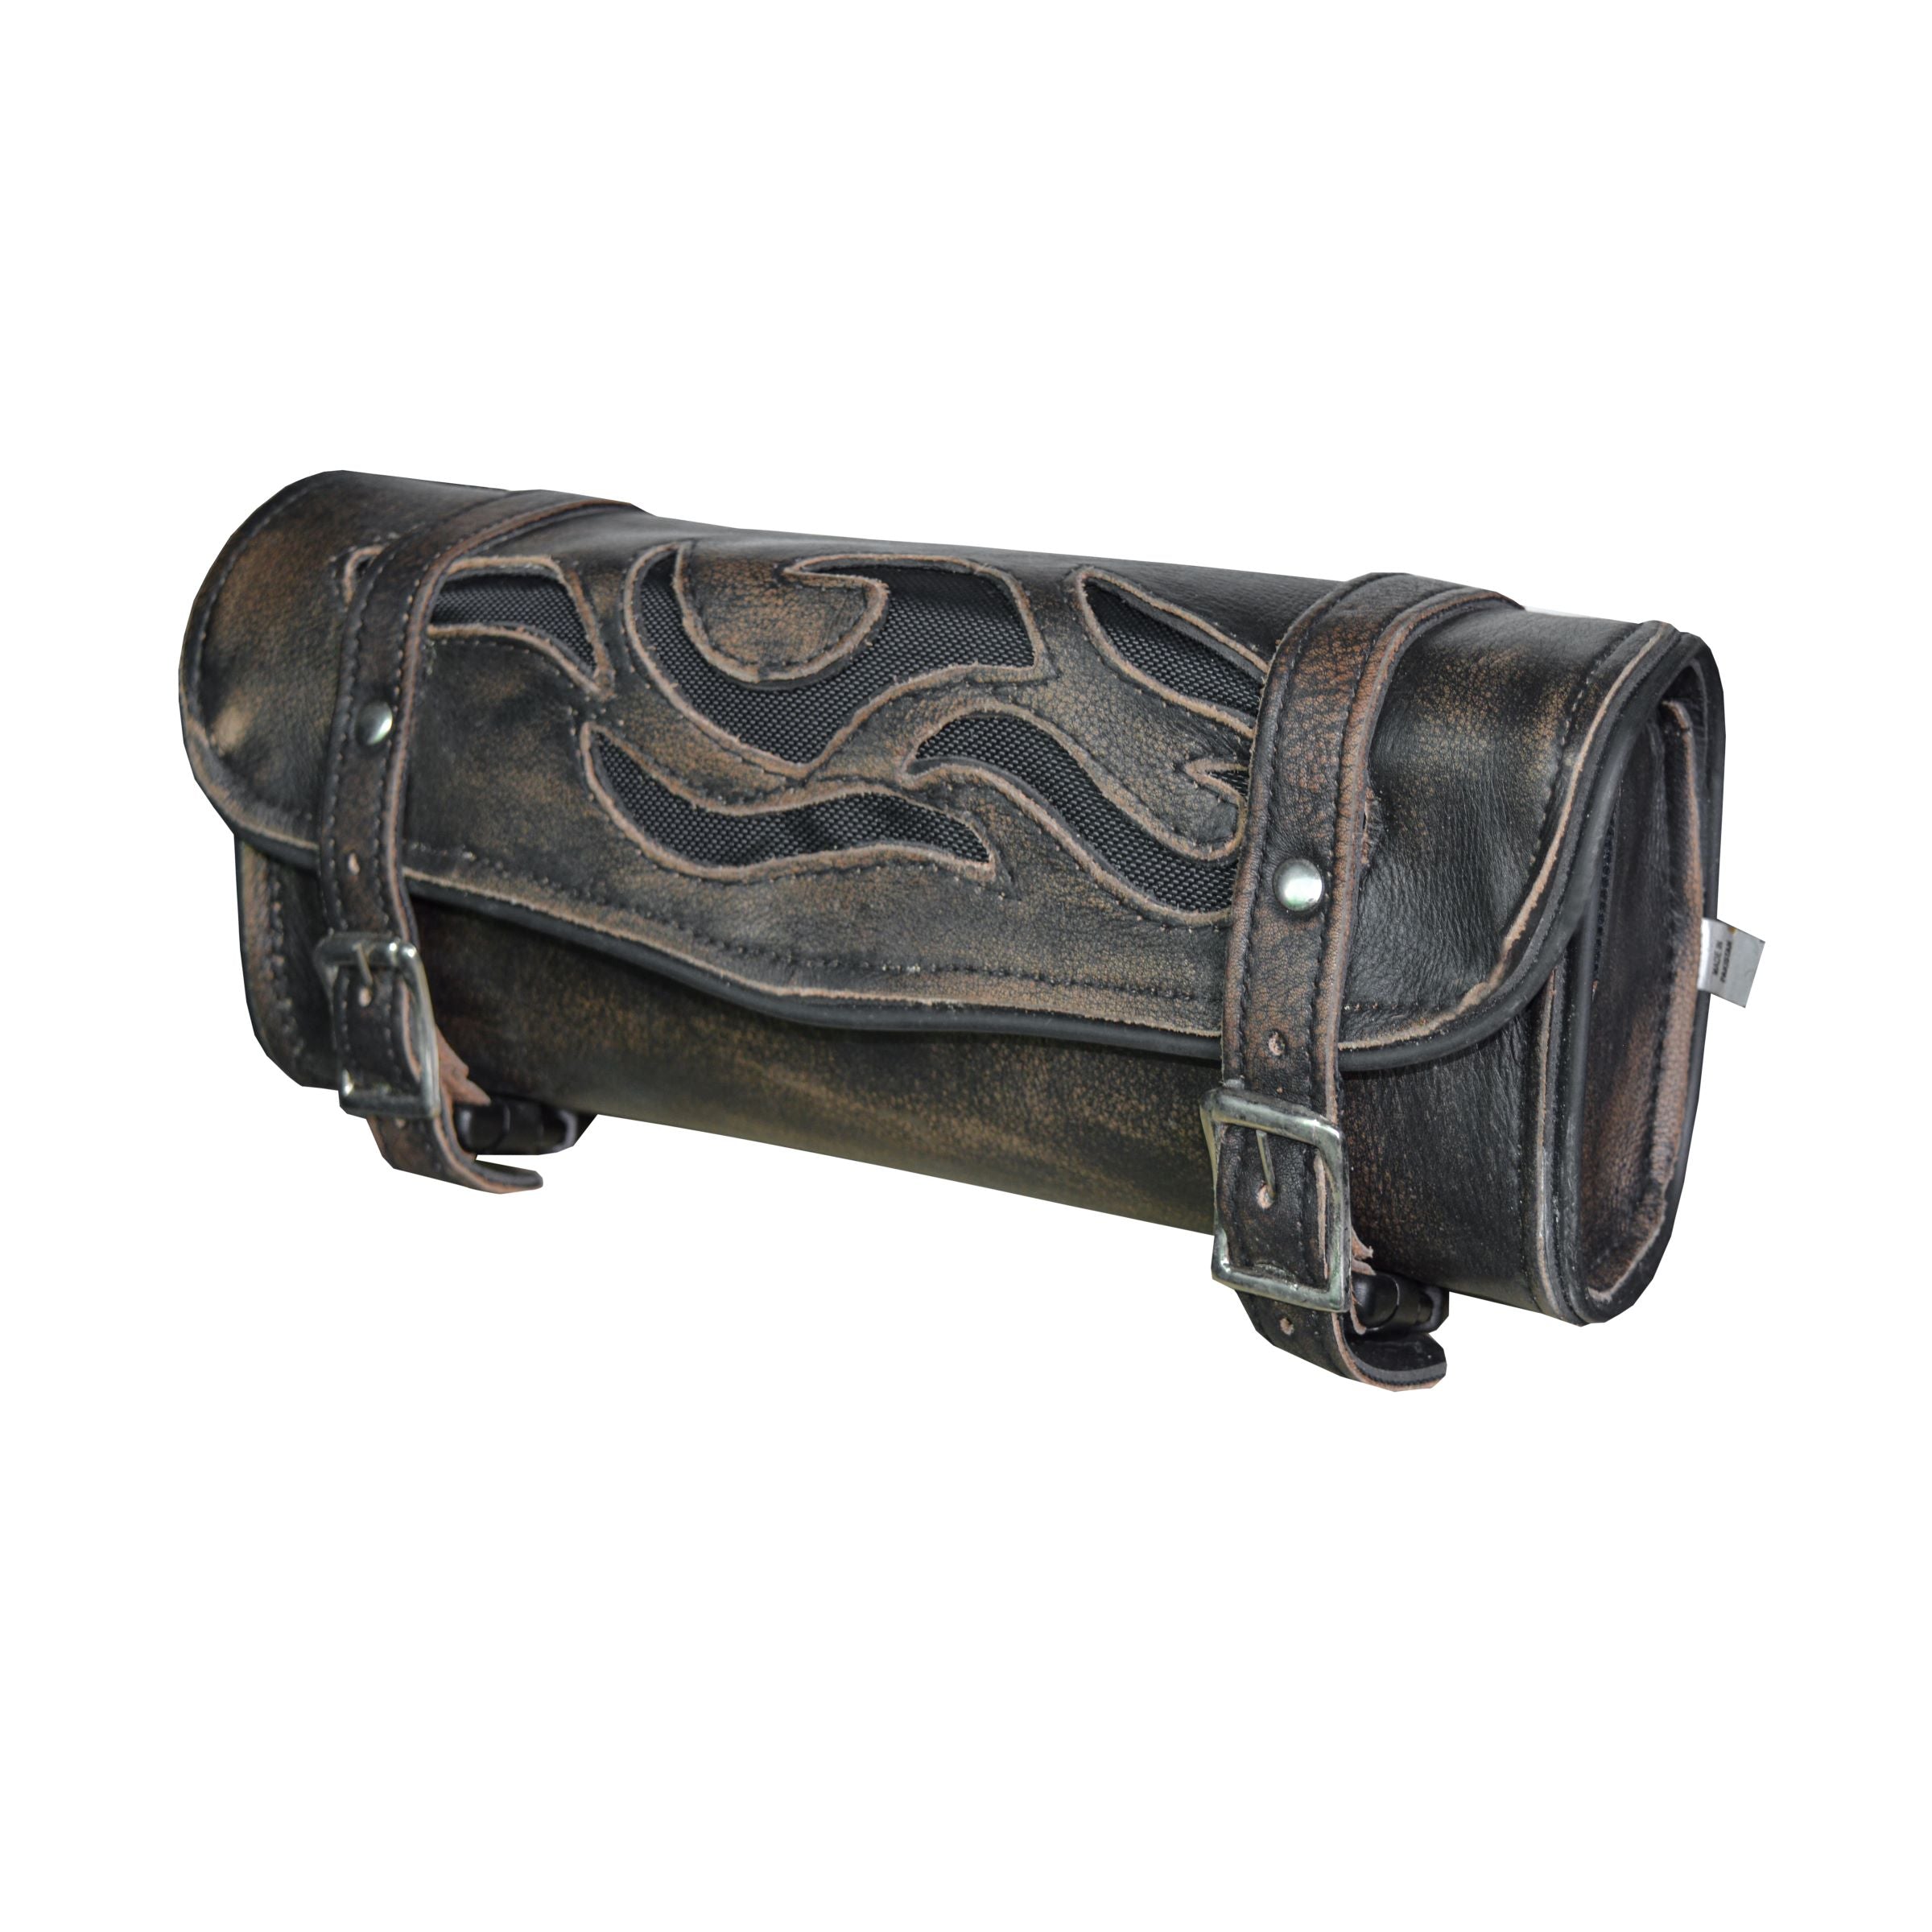 Universal Vintage Motorcycle Saddlebag Leather Bag Storage Tool Pouch  Motorbike Water Bag mutt mash125 mash250 side bag cover - Price history &  Review | AliExpress Seller - Somoto Store | Alitools.io